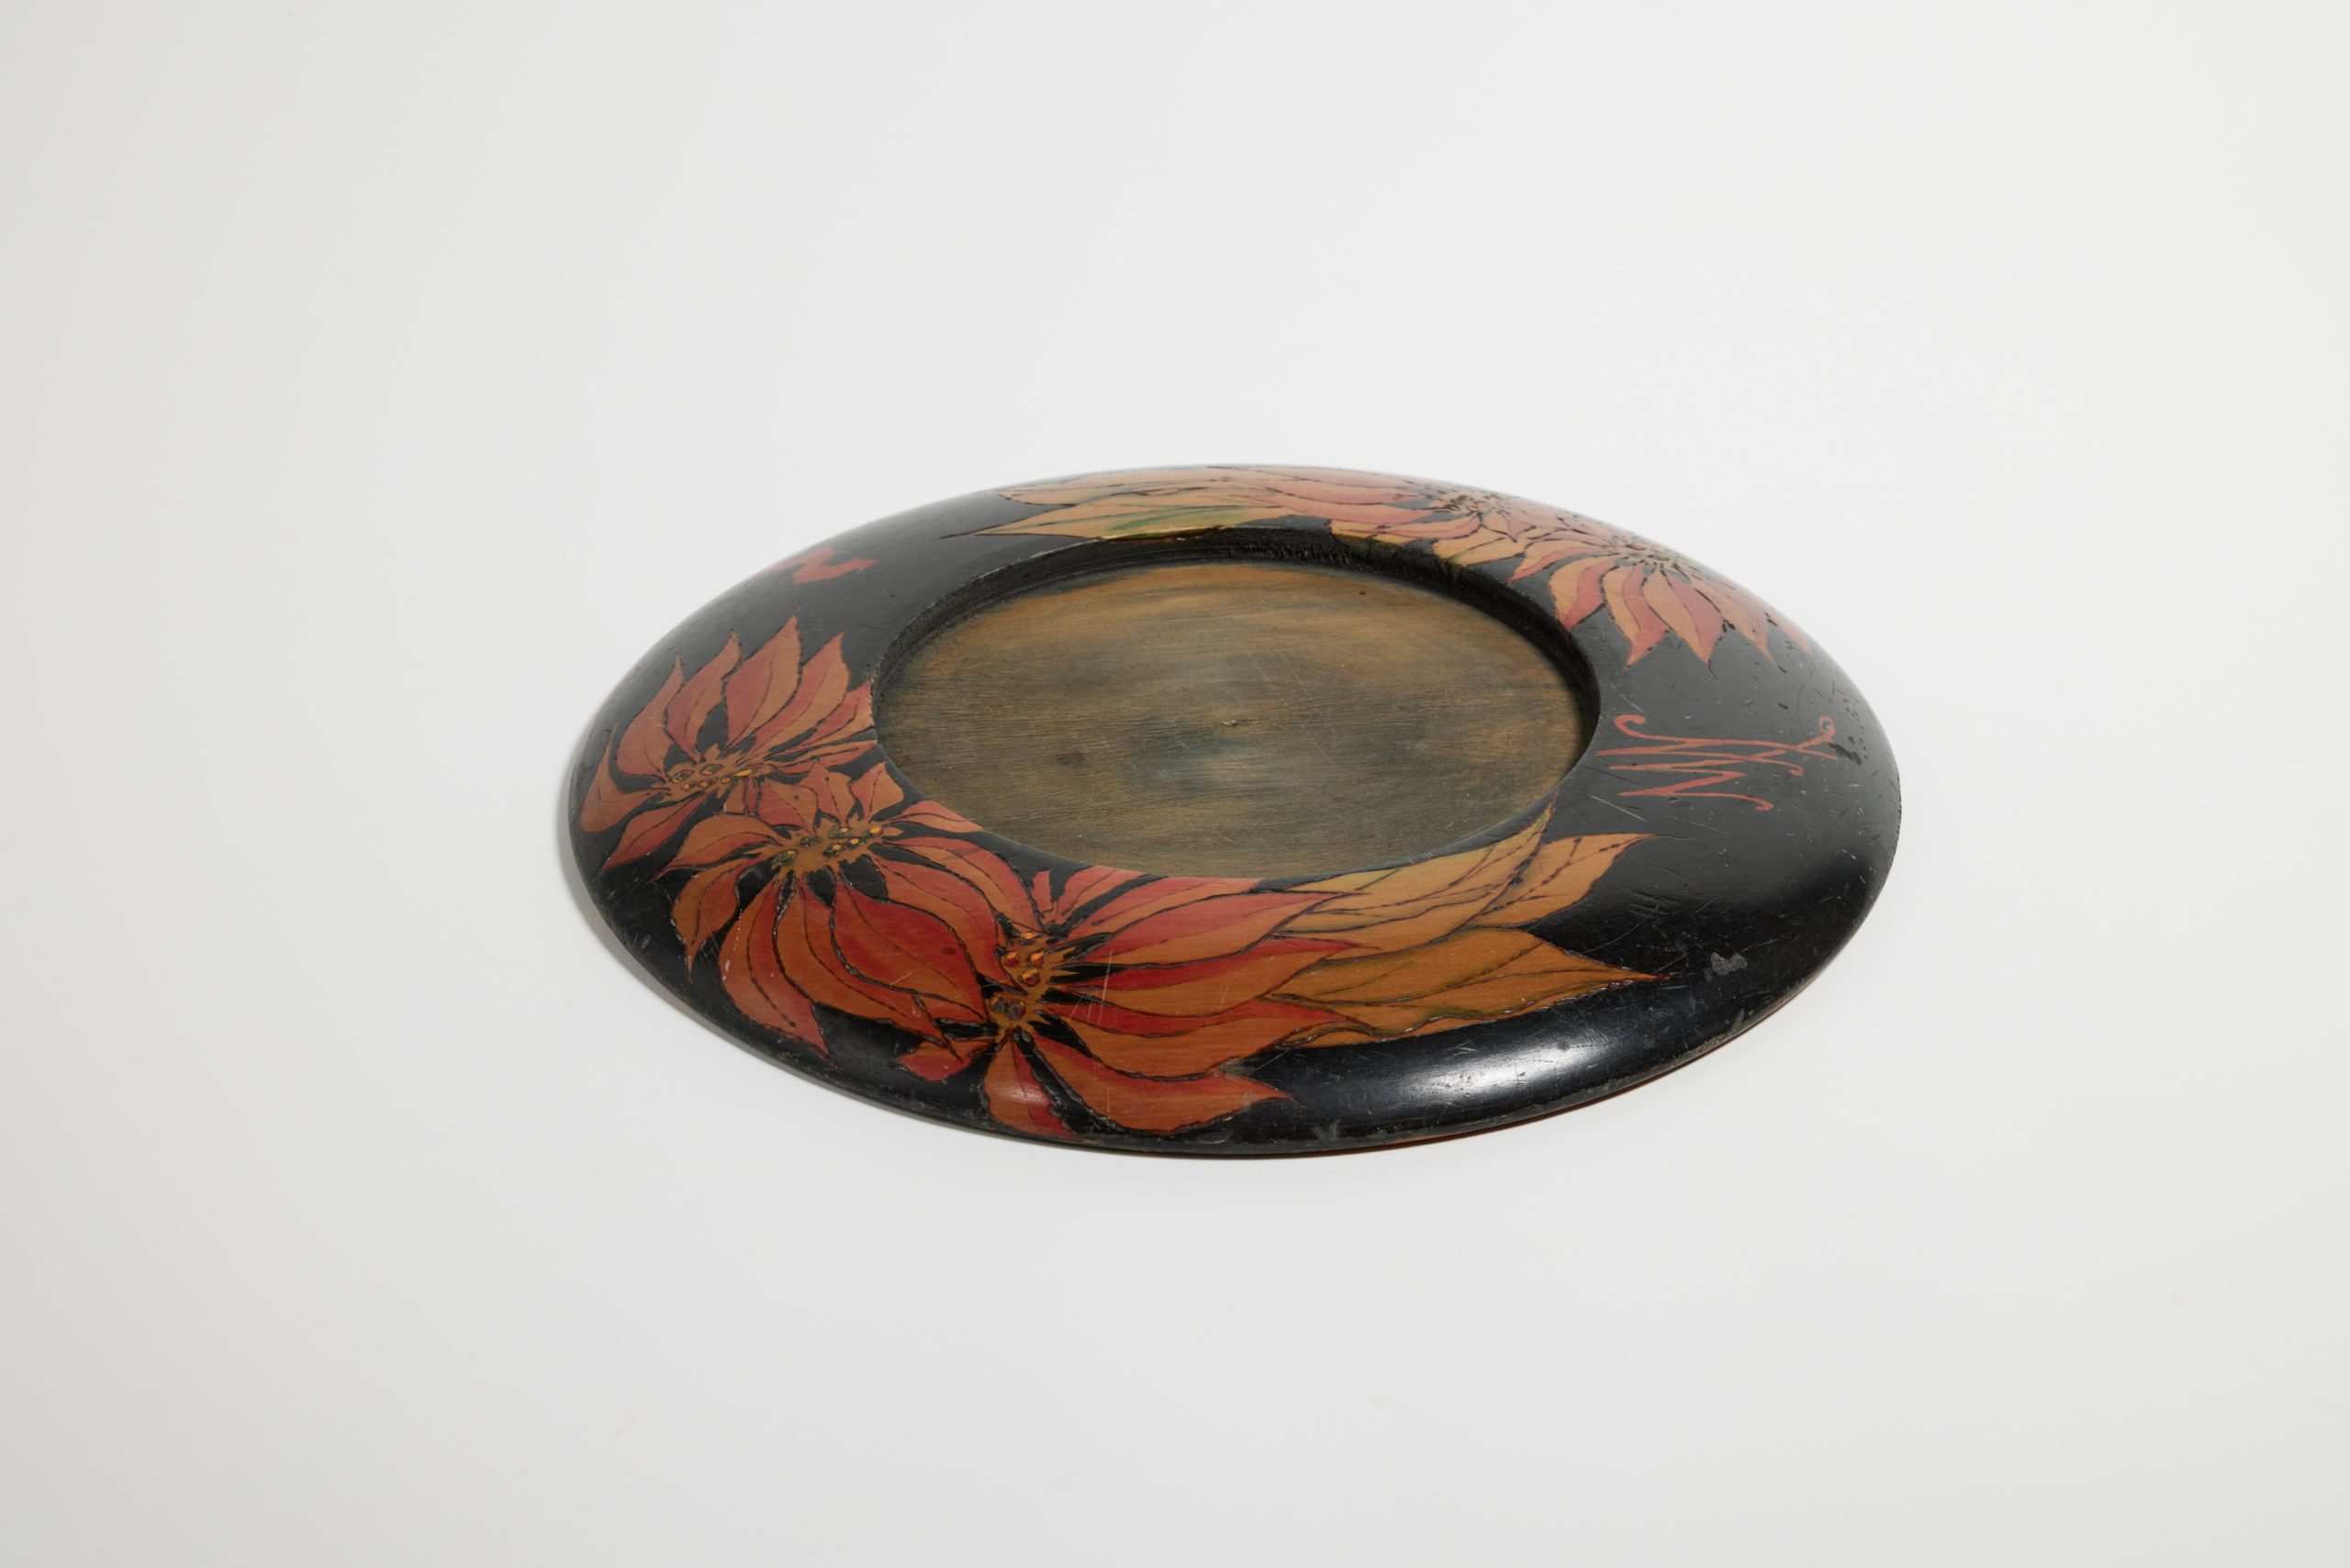 Circular breadboard without chopping board; design of poinsettia flowers burned into the wood